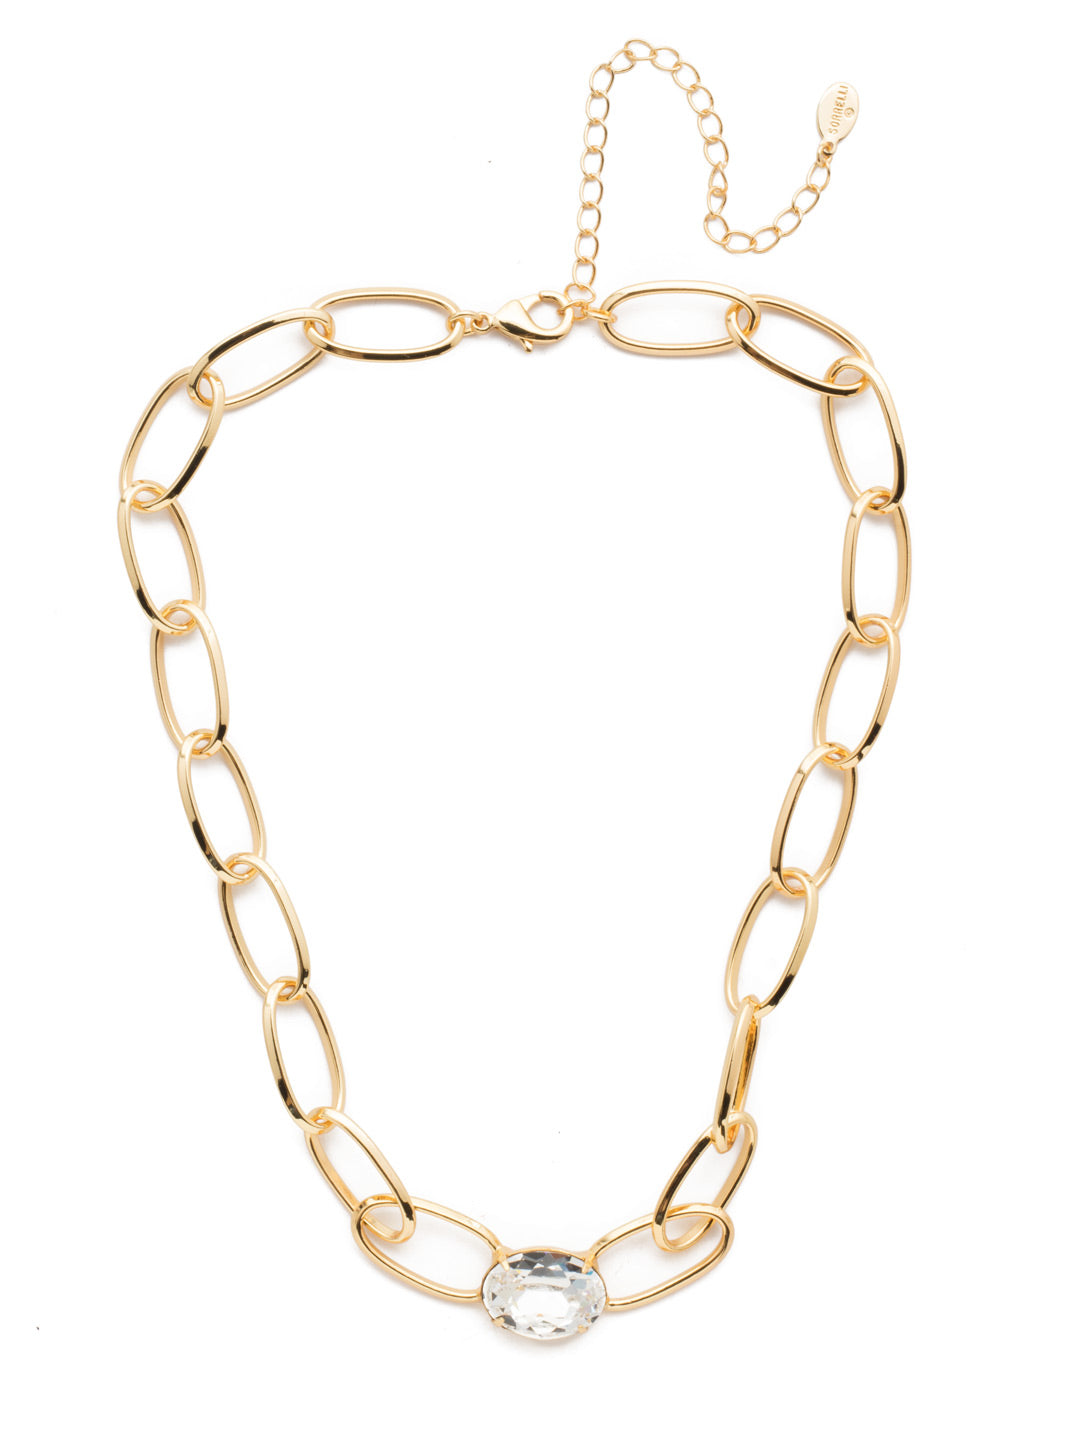 Karisma Tennis Necklace - 4NES12BGCRY - <p>The Karisma Tennis Necklace is airy and light with its open metallic links, all the while demanding attention from a seriously sparkling crystal taking center stage. From Sorrelli's Crystal collection in our Bright Gold-tone finish.</p>